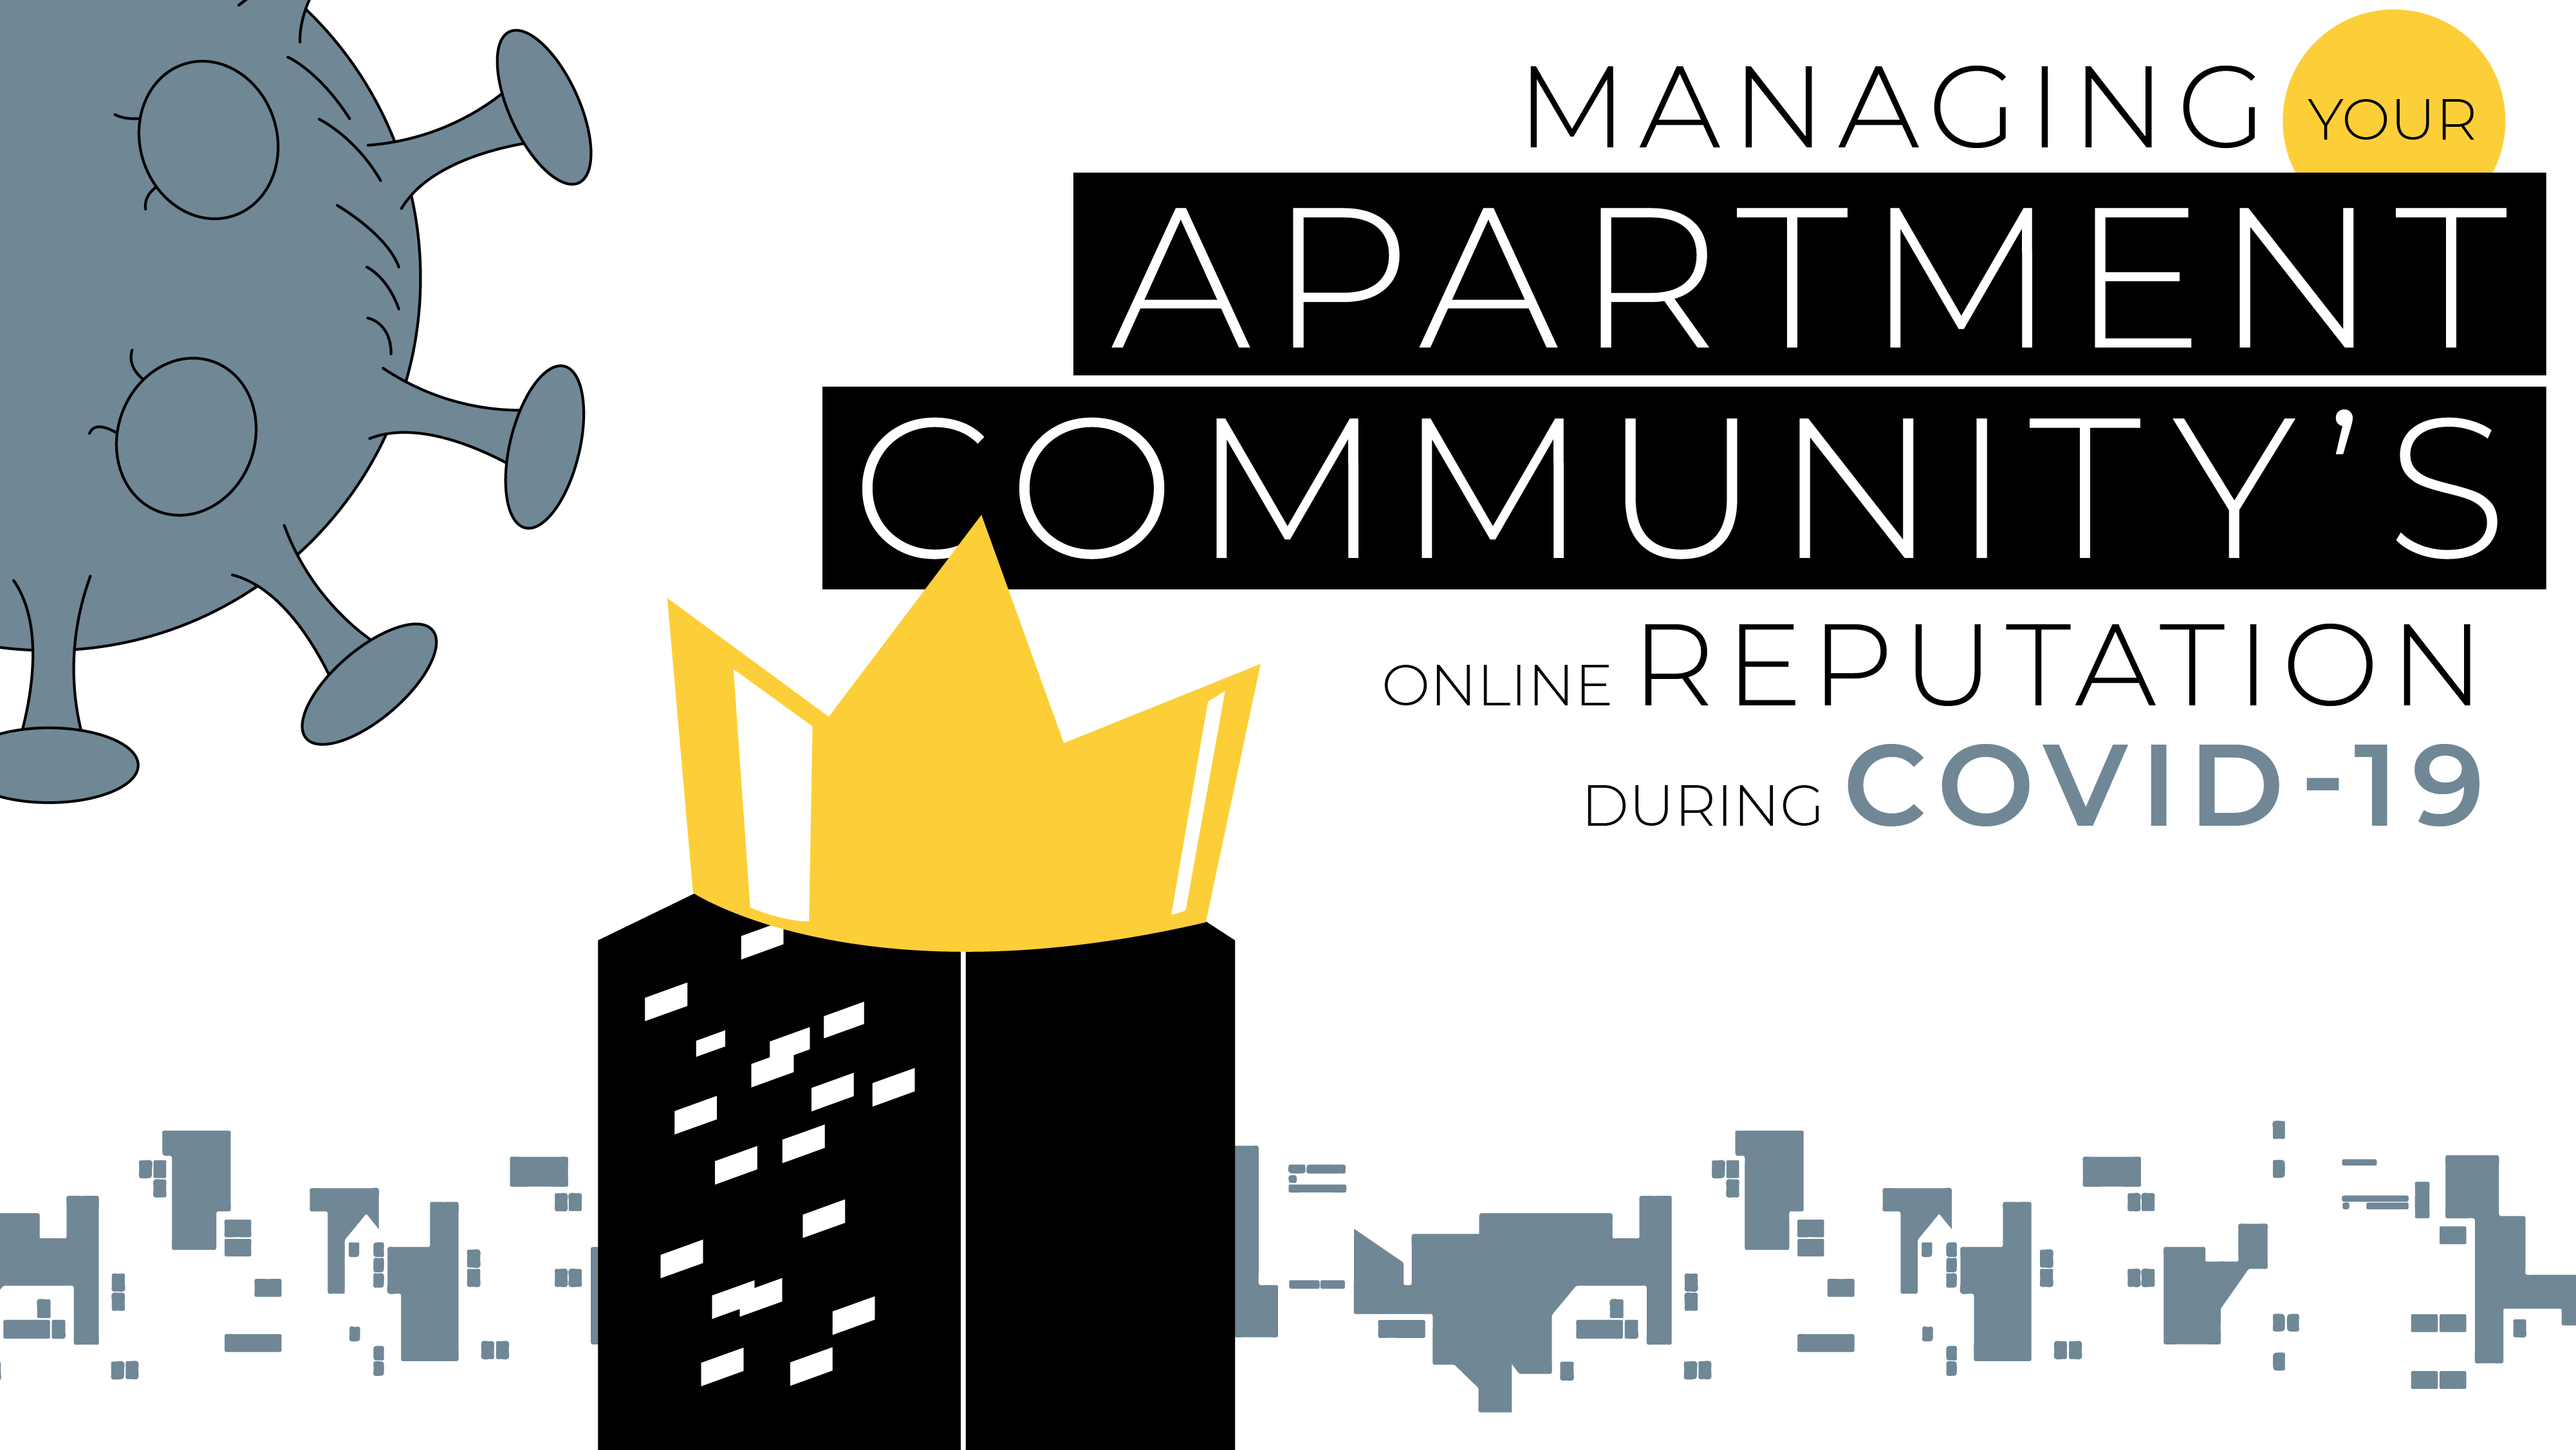 Managing Your Apartment Community’s Online Reputation During COVID-19